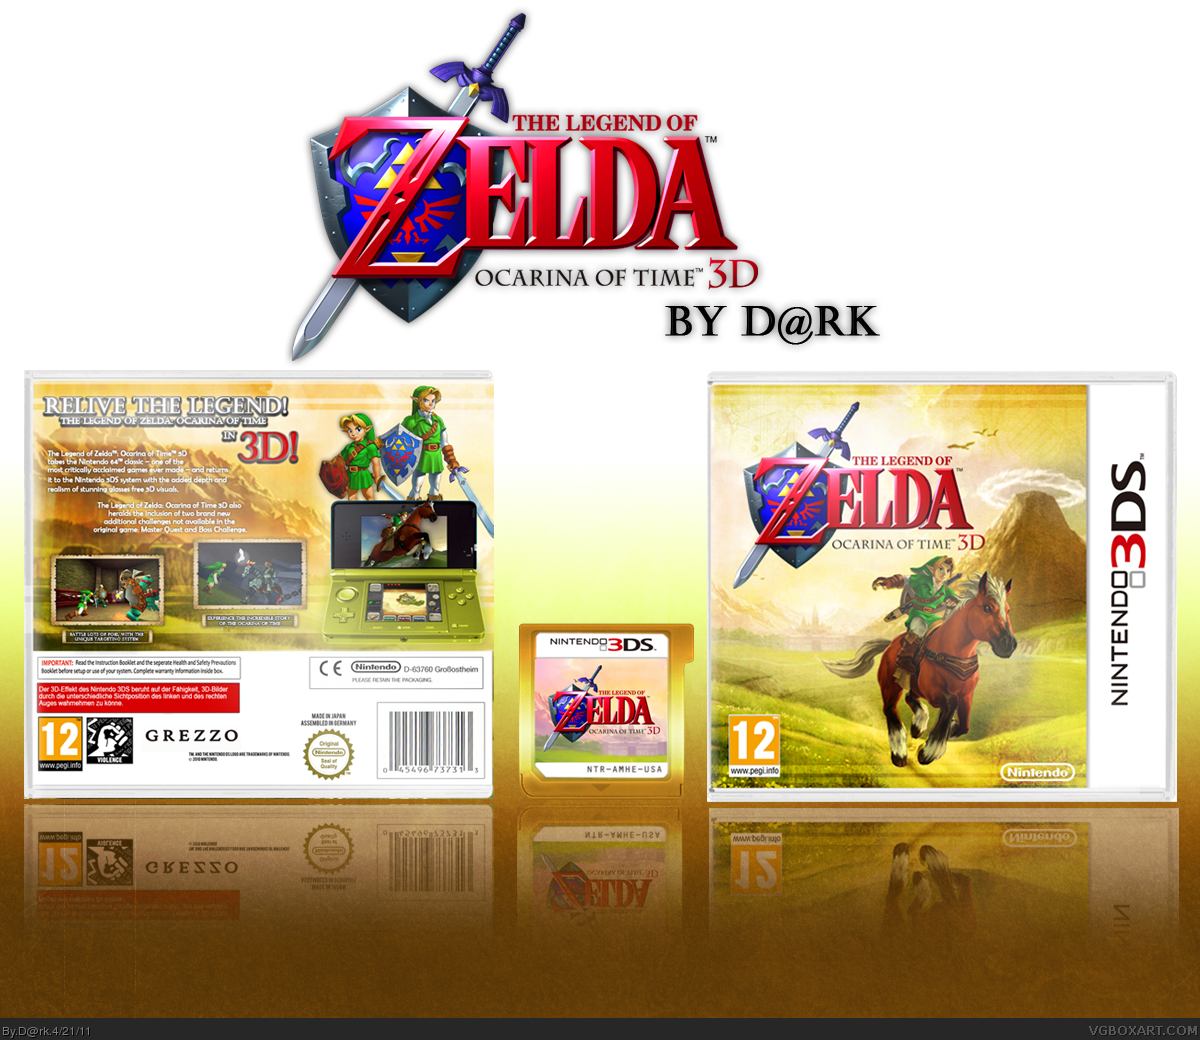 The Legend of Zelda: Ocarina of Time Wii Box Art Cover by Eggboy'13